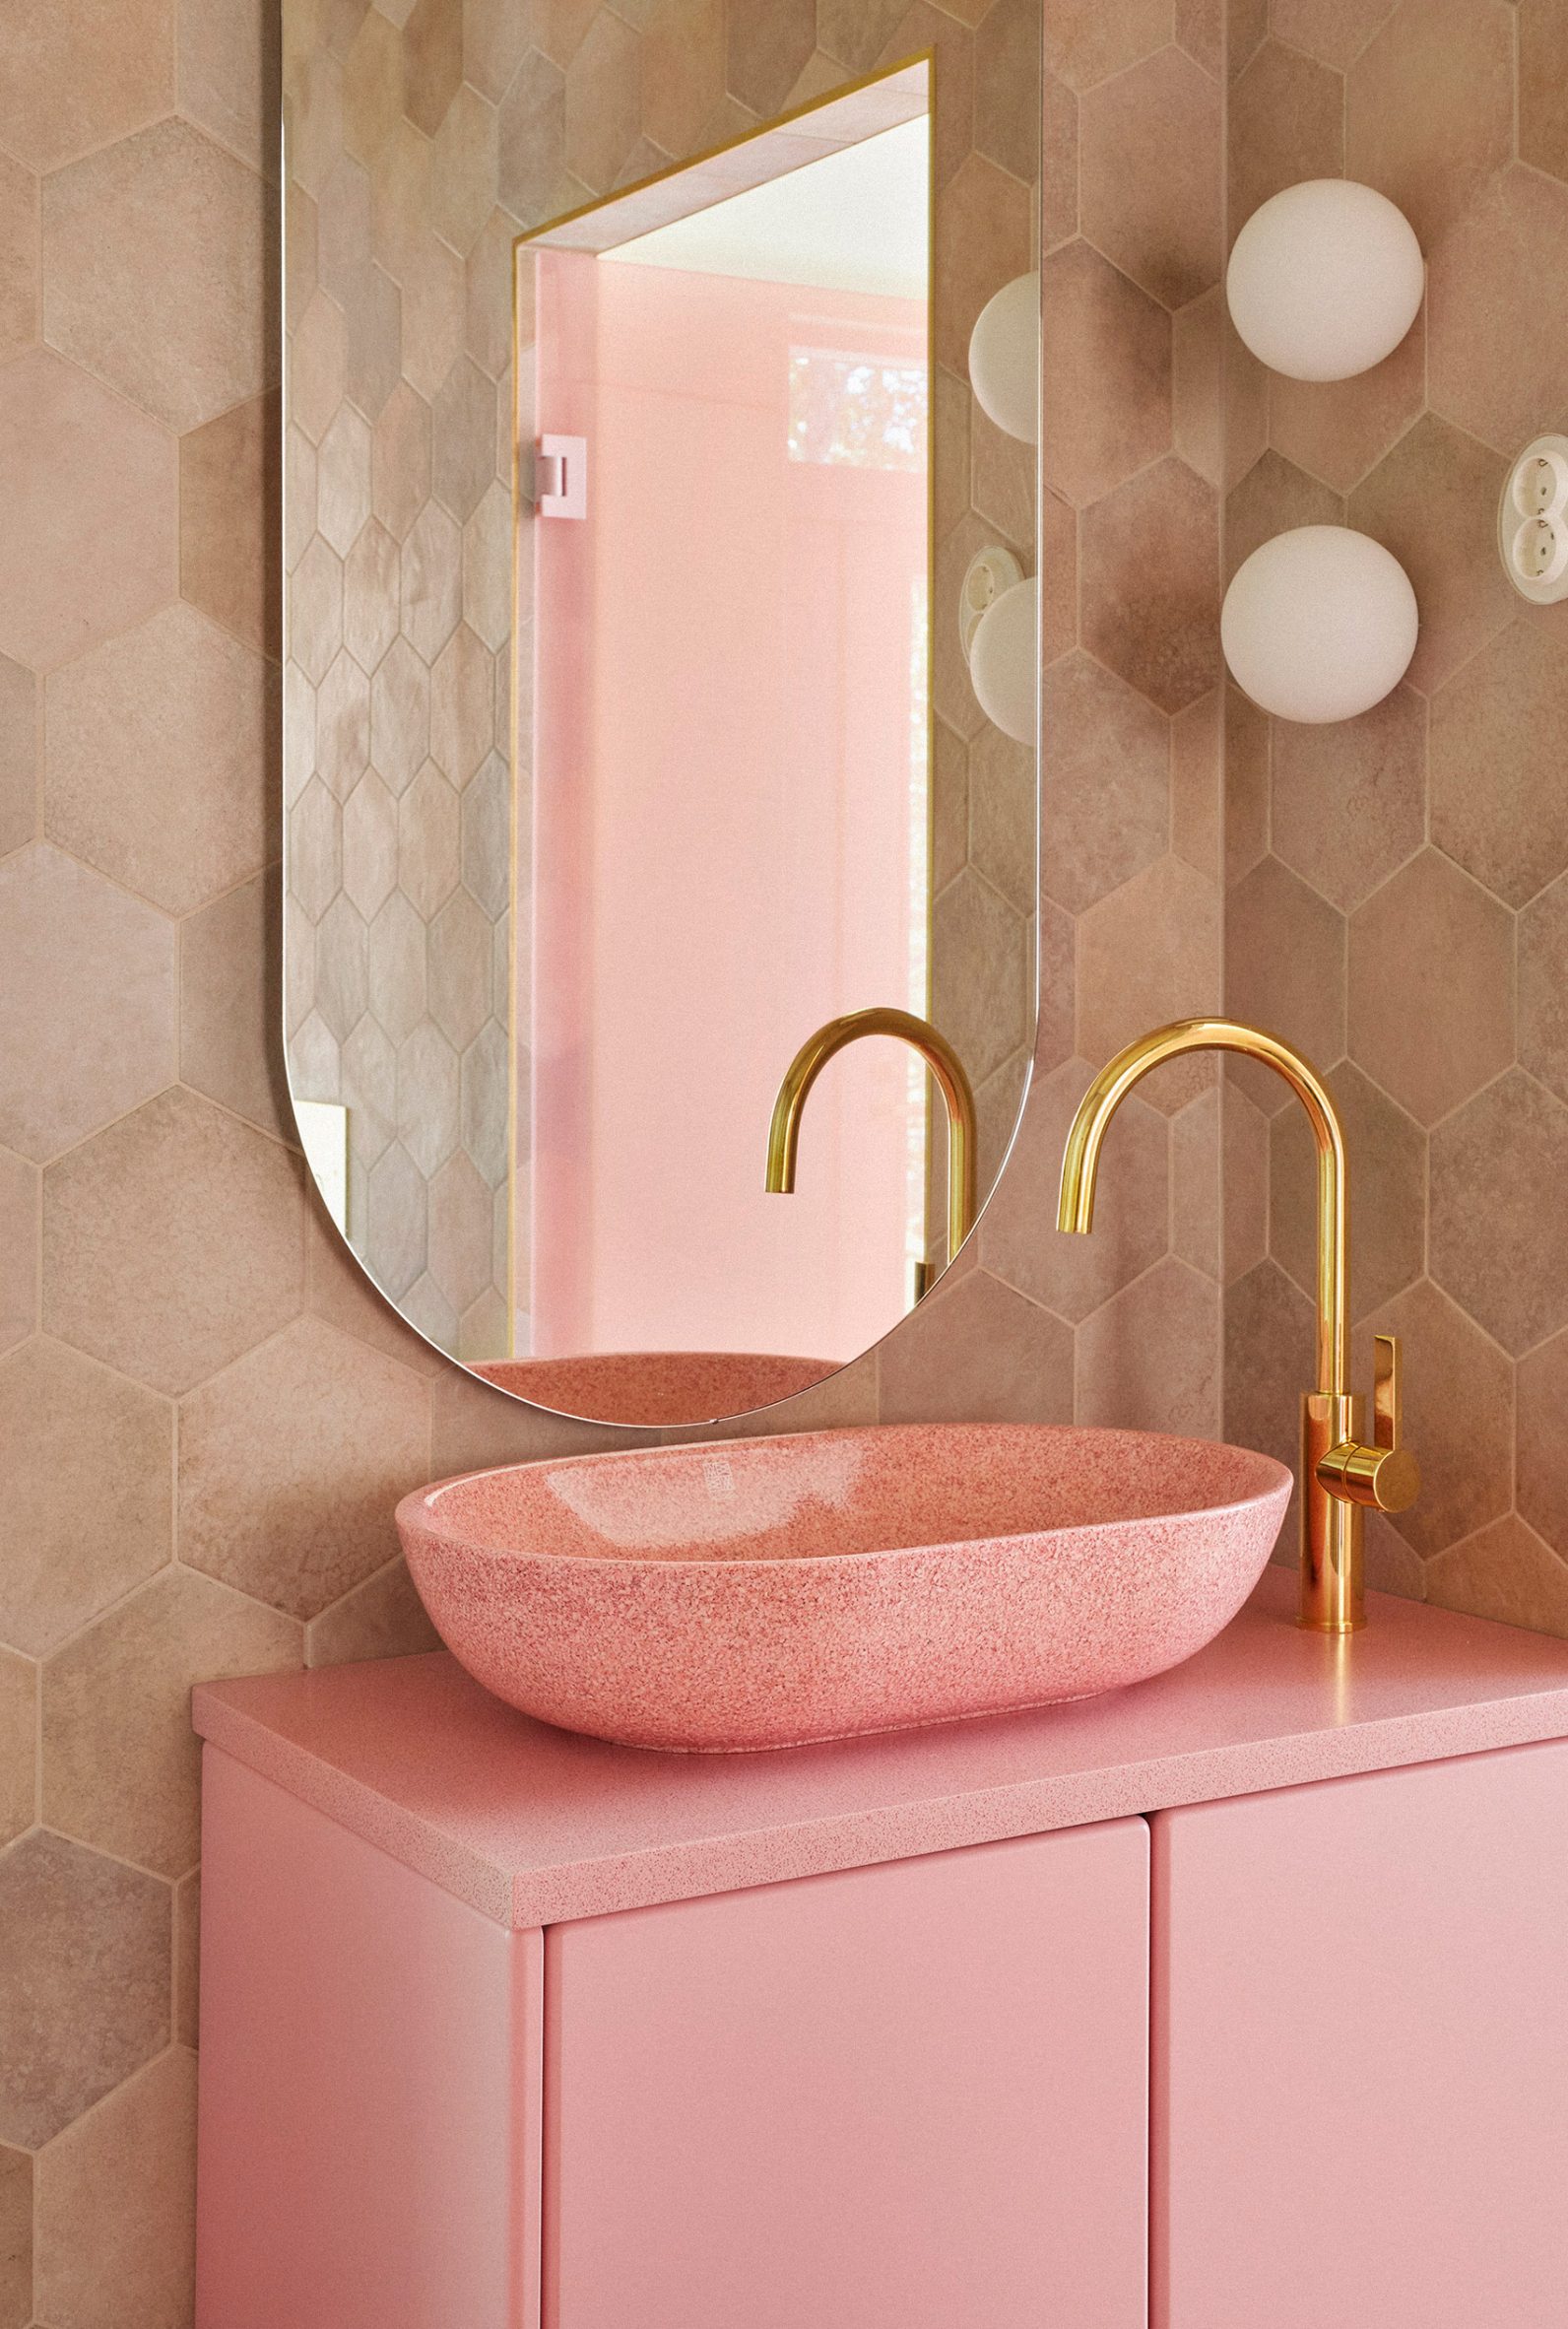 Woodio Blossom bathroom collection by Woodio